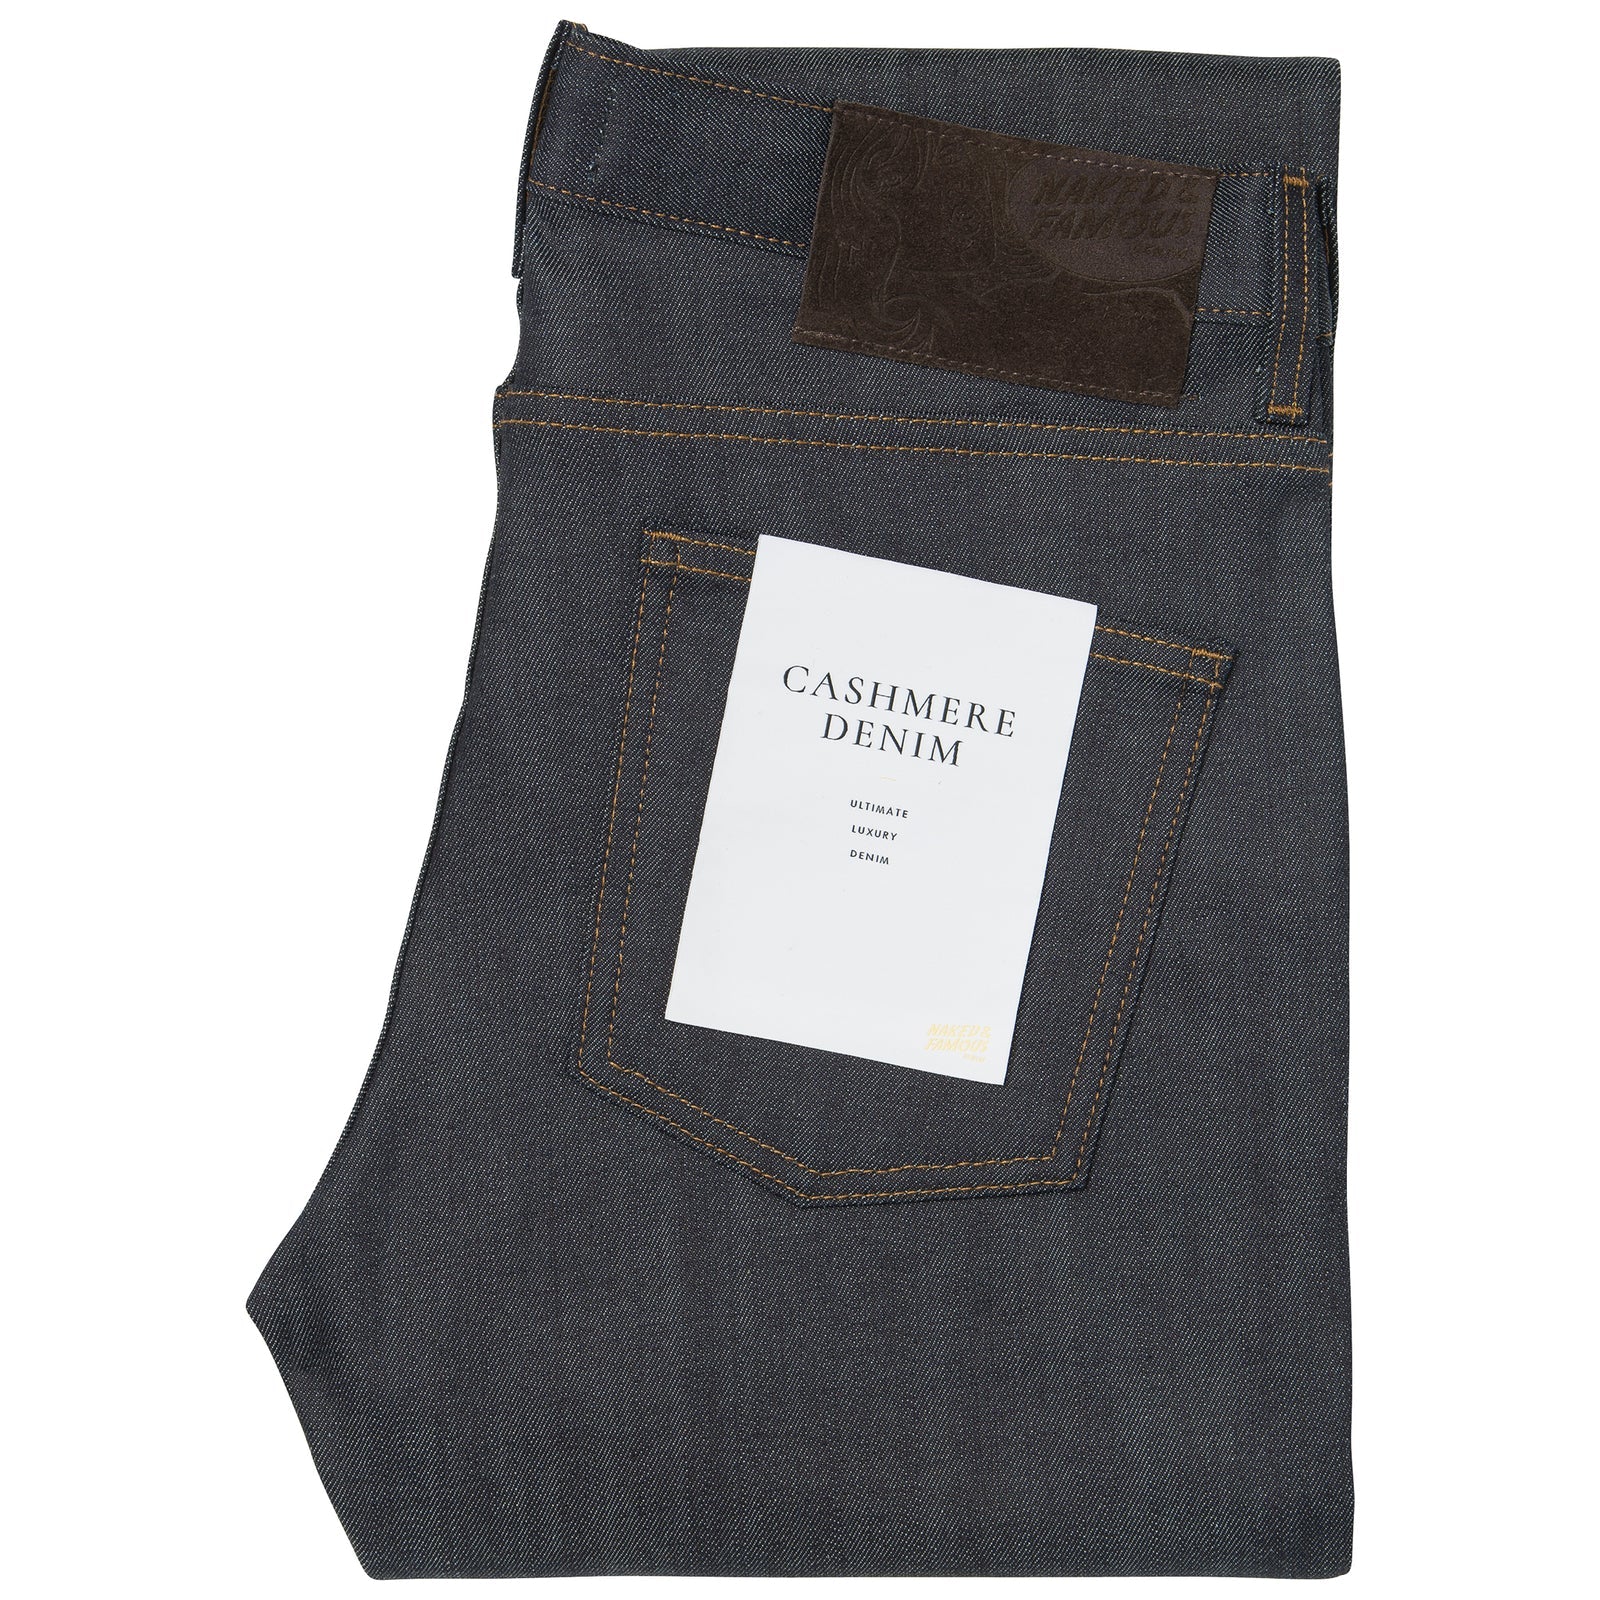 Naked and Famous - Super Guy - Cashmere Blend Stretch Denim